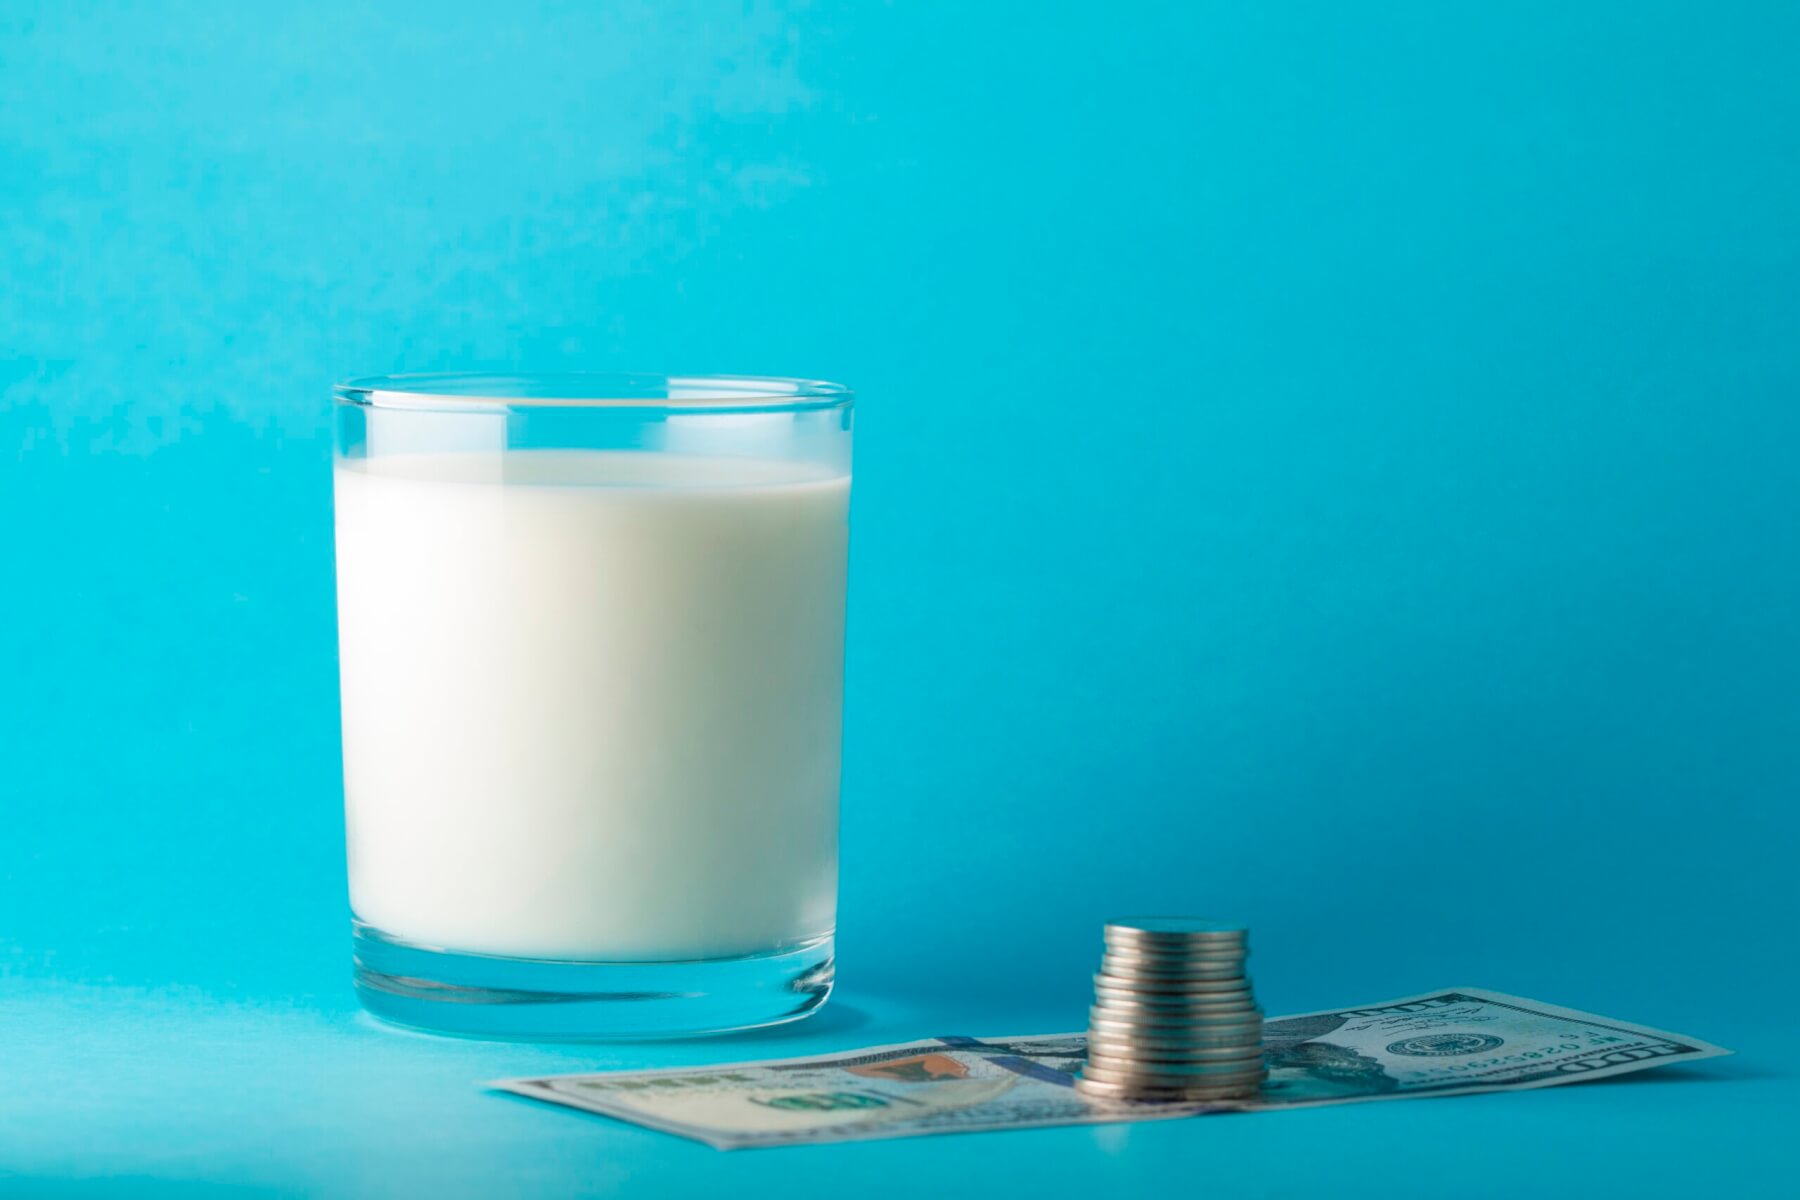 photo of a glass of milk and money next to it